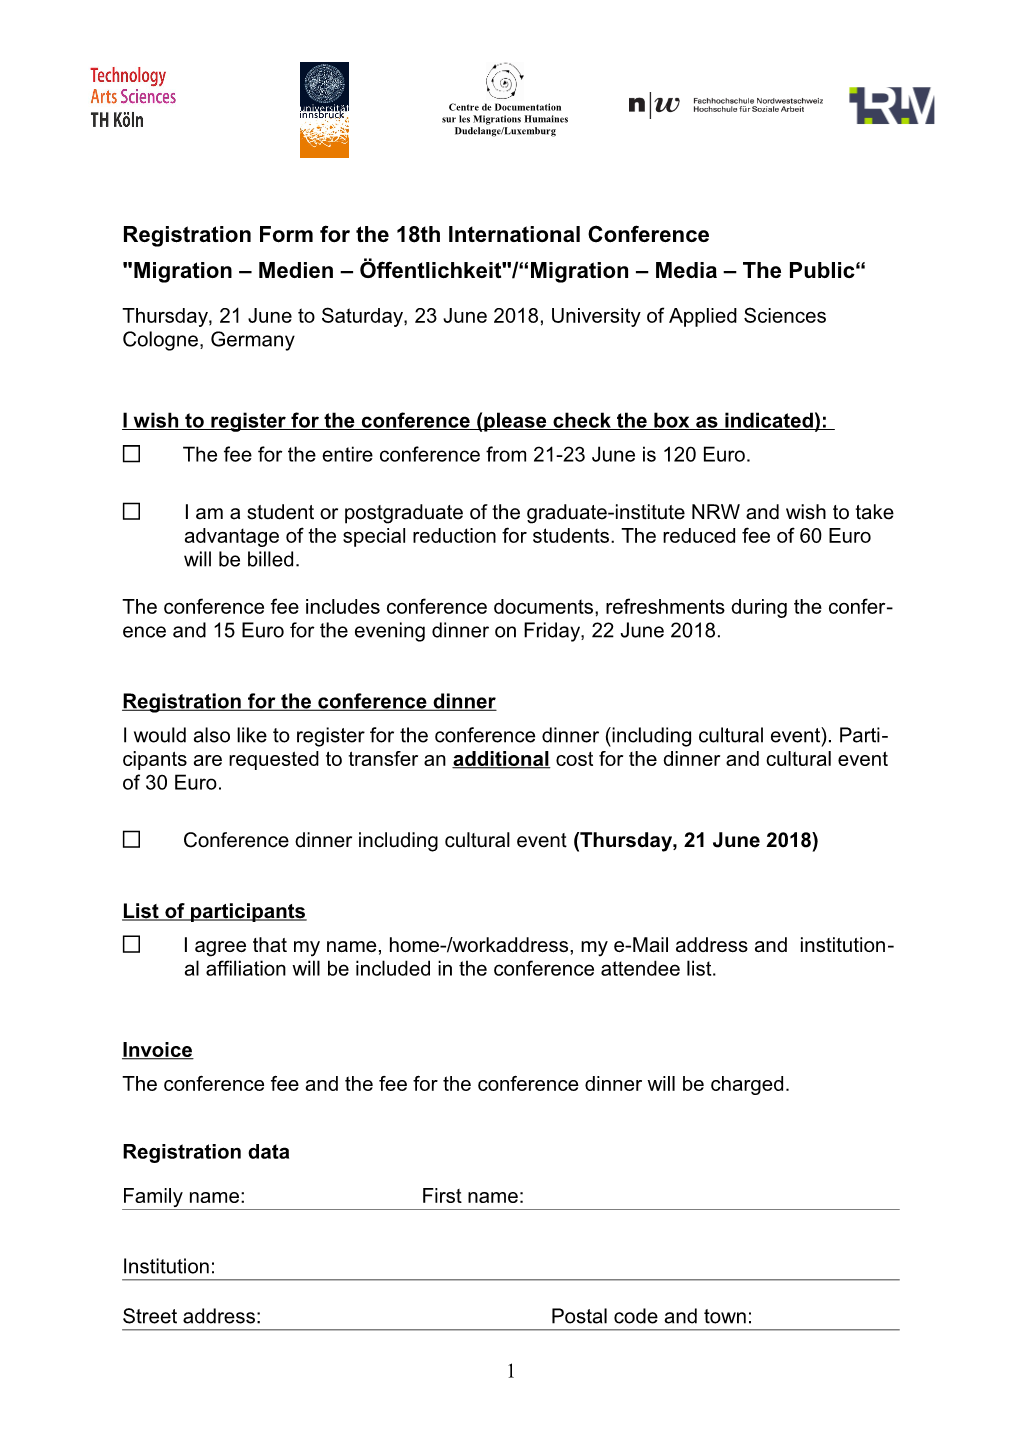 Registration Form for the 18Th International Conference